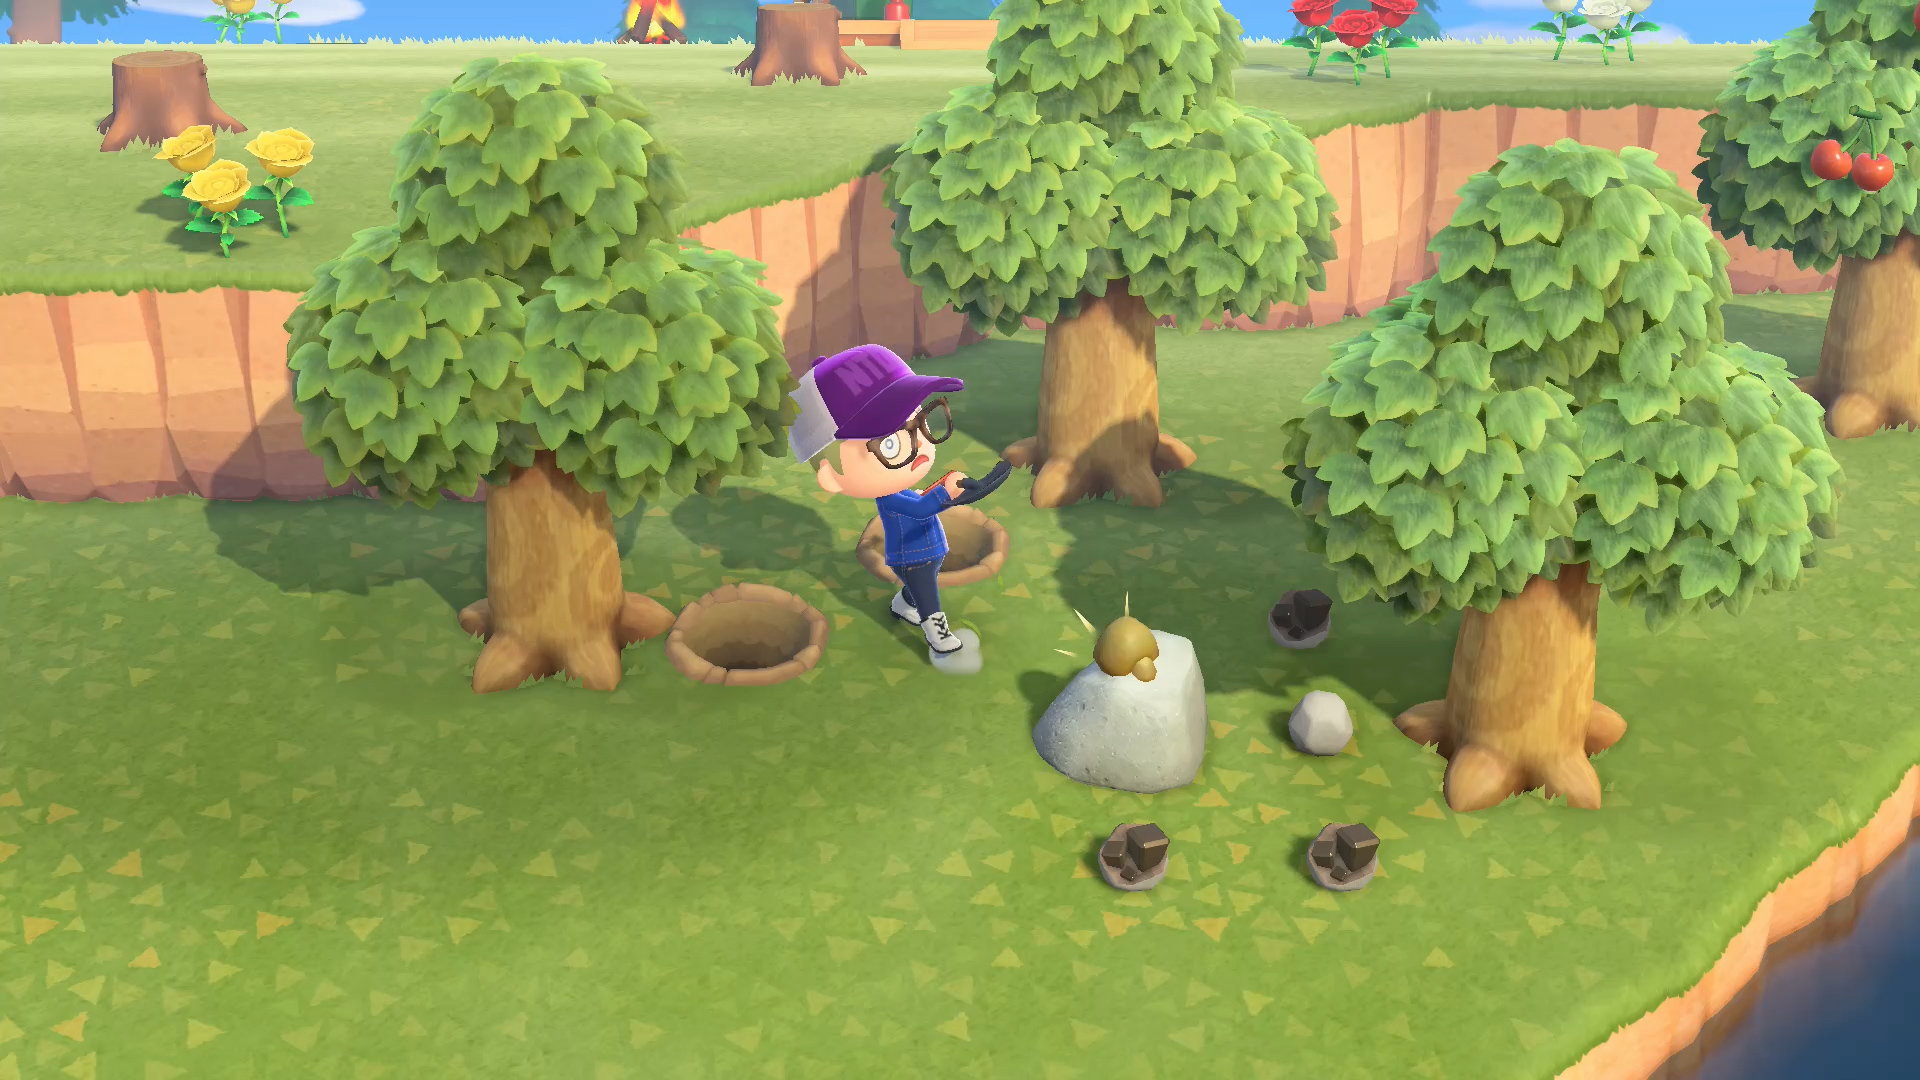 Animal Crossing: New Horizons beginners guide: Find the money rock every day